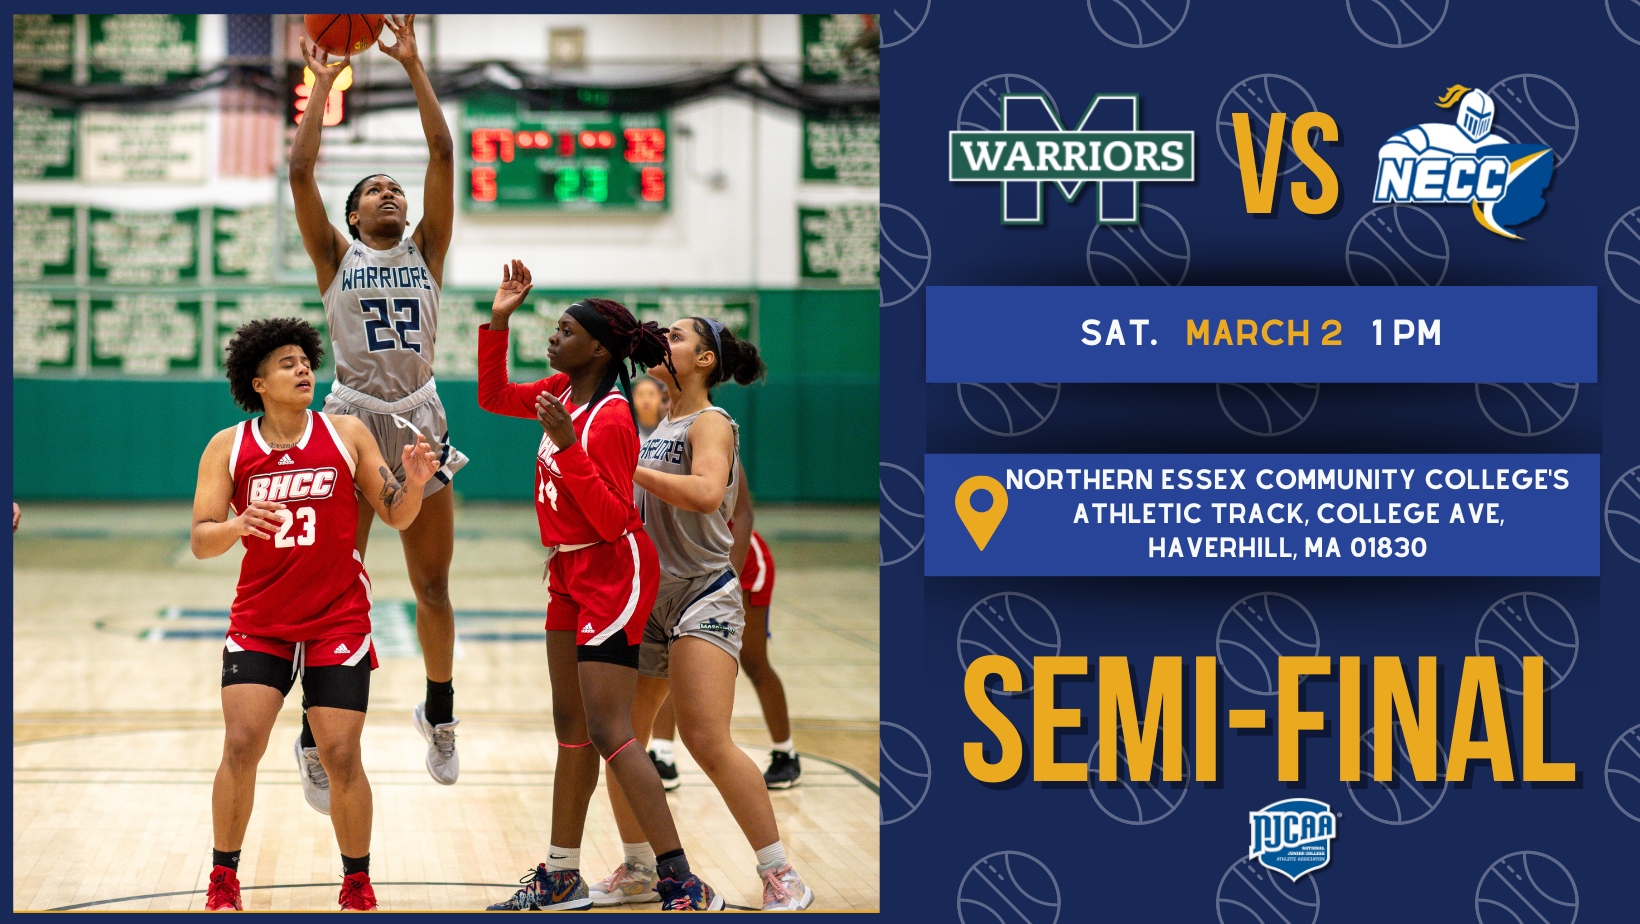 Massasoit Women's Basketball travels to Haverhill, MA on Saturday, March 2nd to face Northern Essex CC in the Semi-Final!